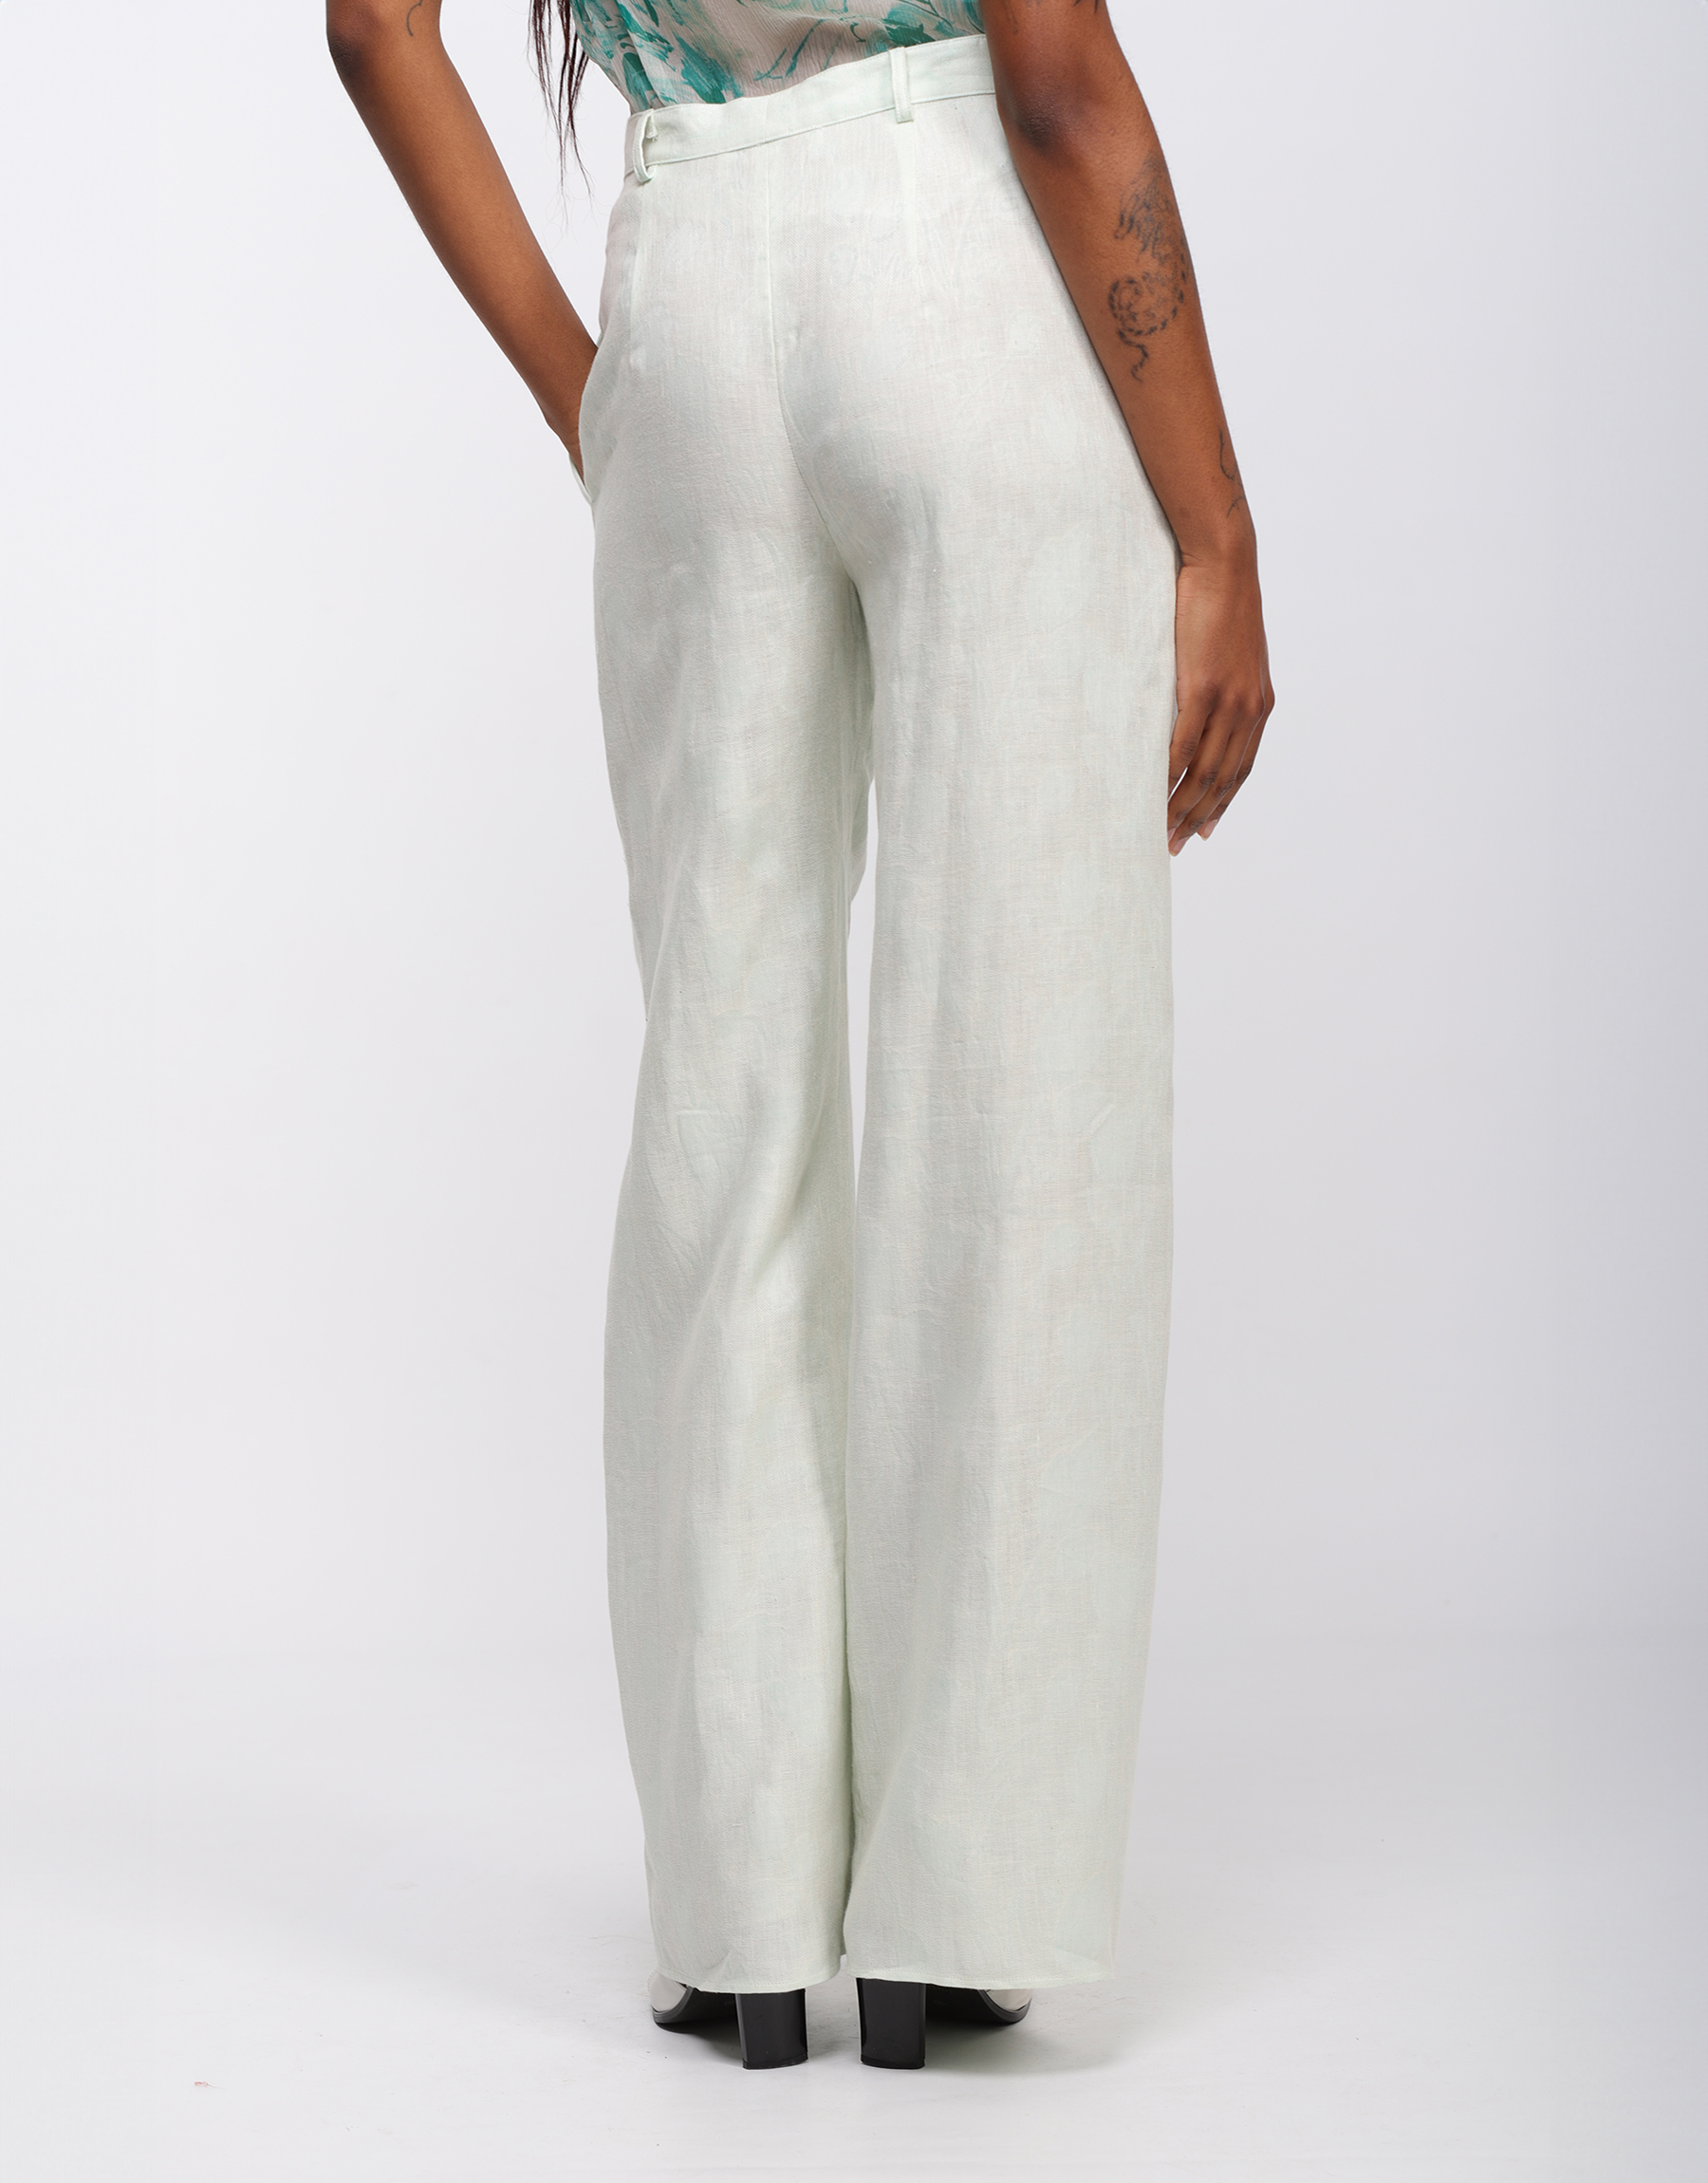 Wide-leg trousers in sea green and ivory linen brocade